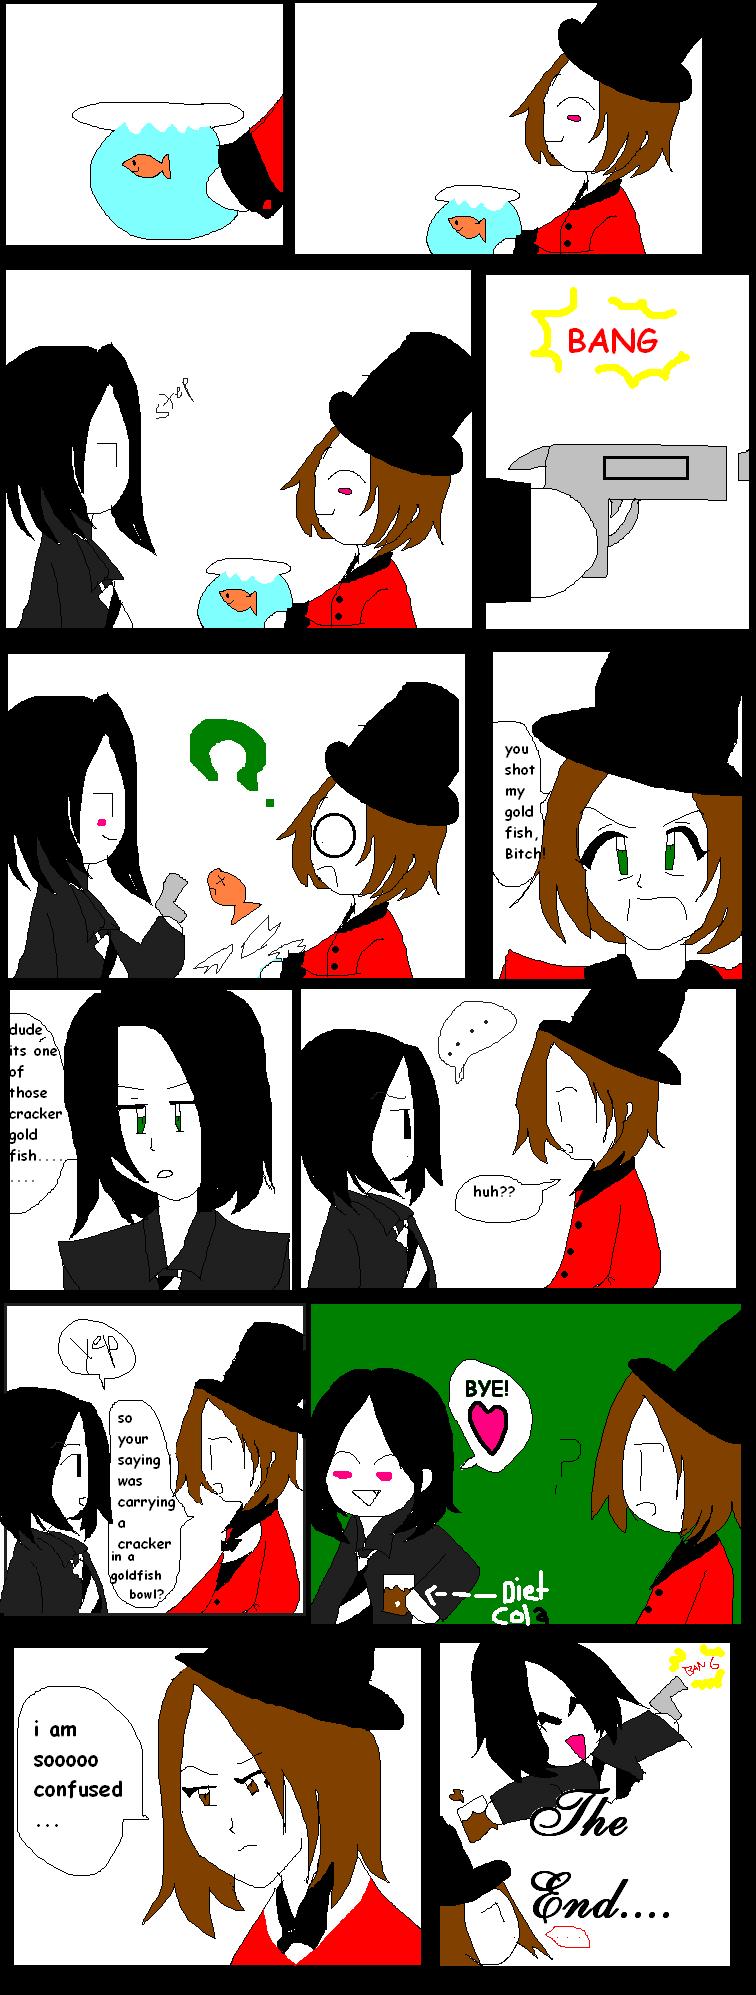 gerard+brenden comic(request for anime-girl-007 by gerard_frankie_lvr